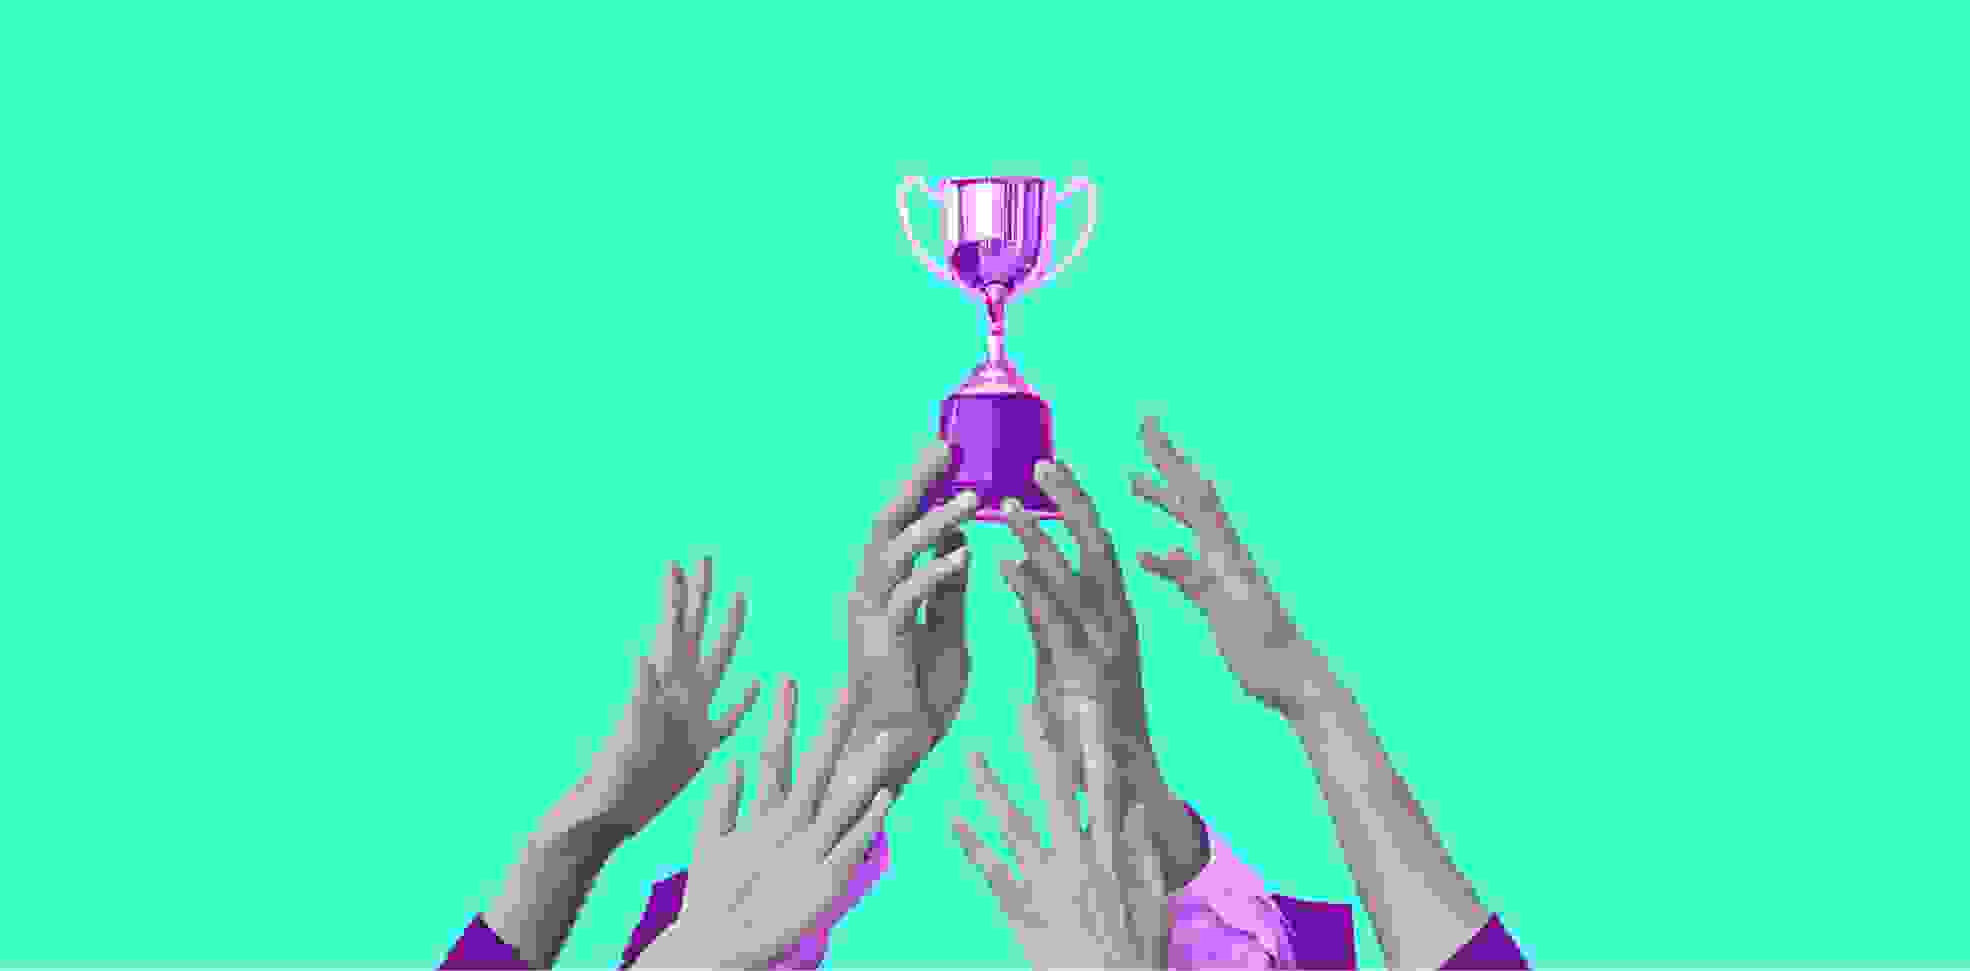 hands holding the winner's cup on green background